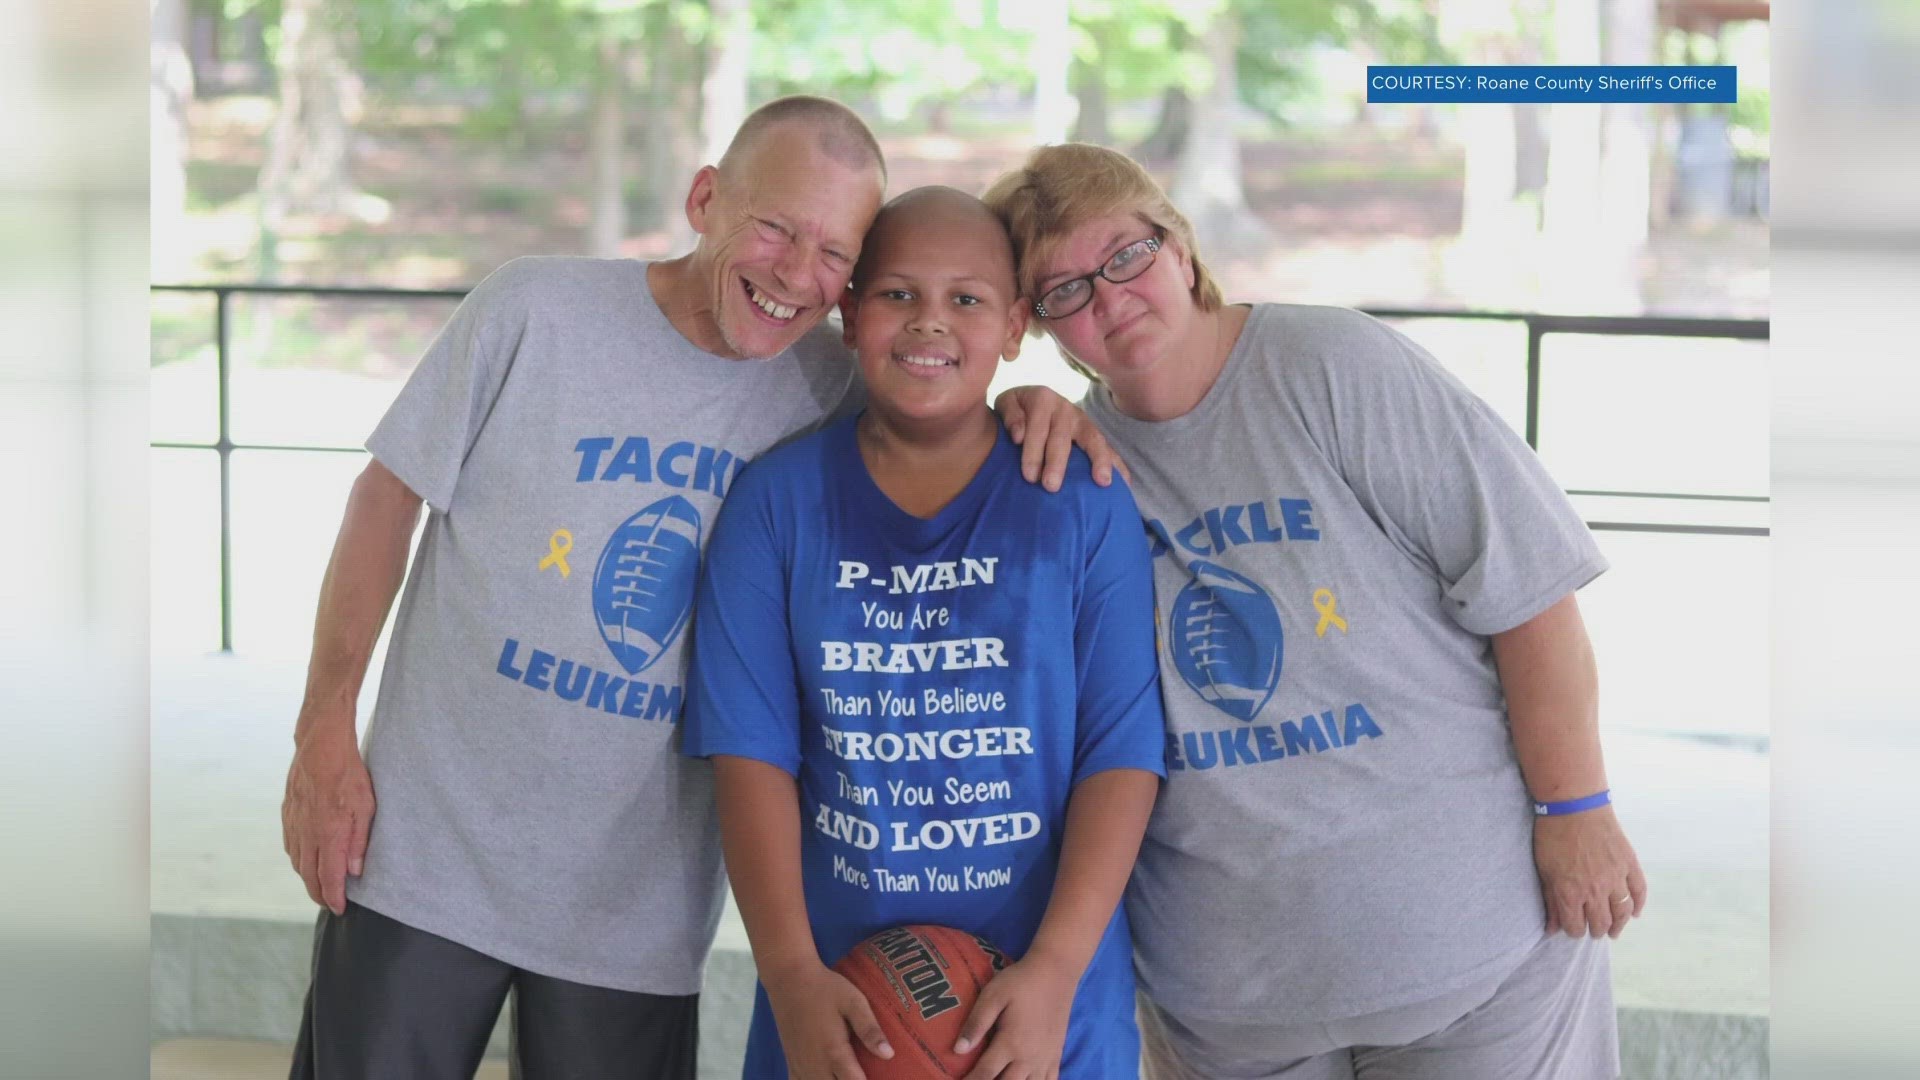 PMan, who was diagnosed with bone marrow cancer in 2019, was known in the community for his loving spirit and fierce generosity.